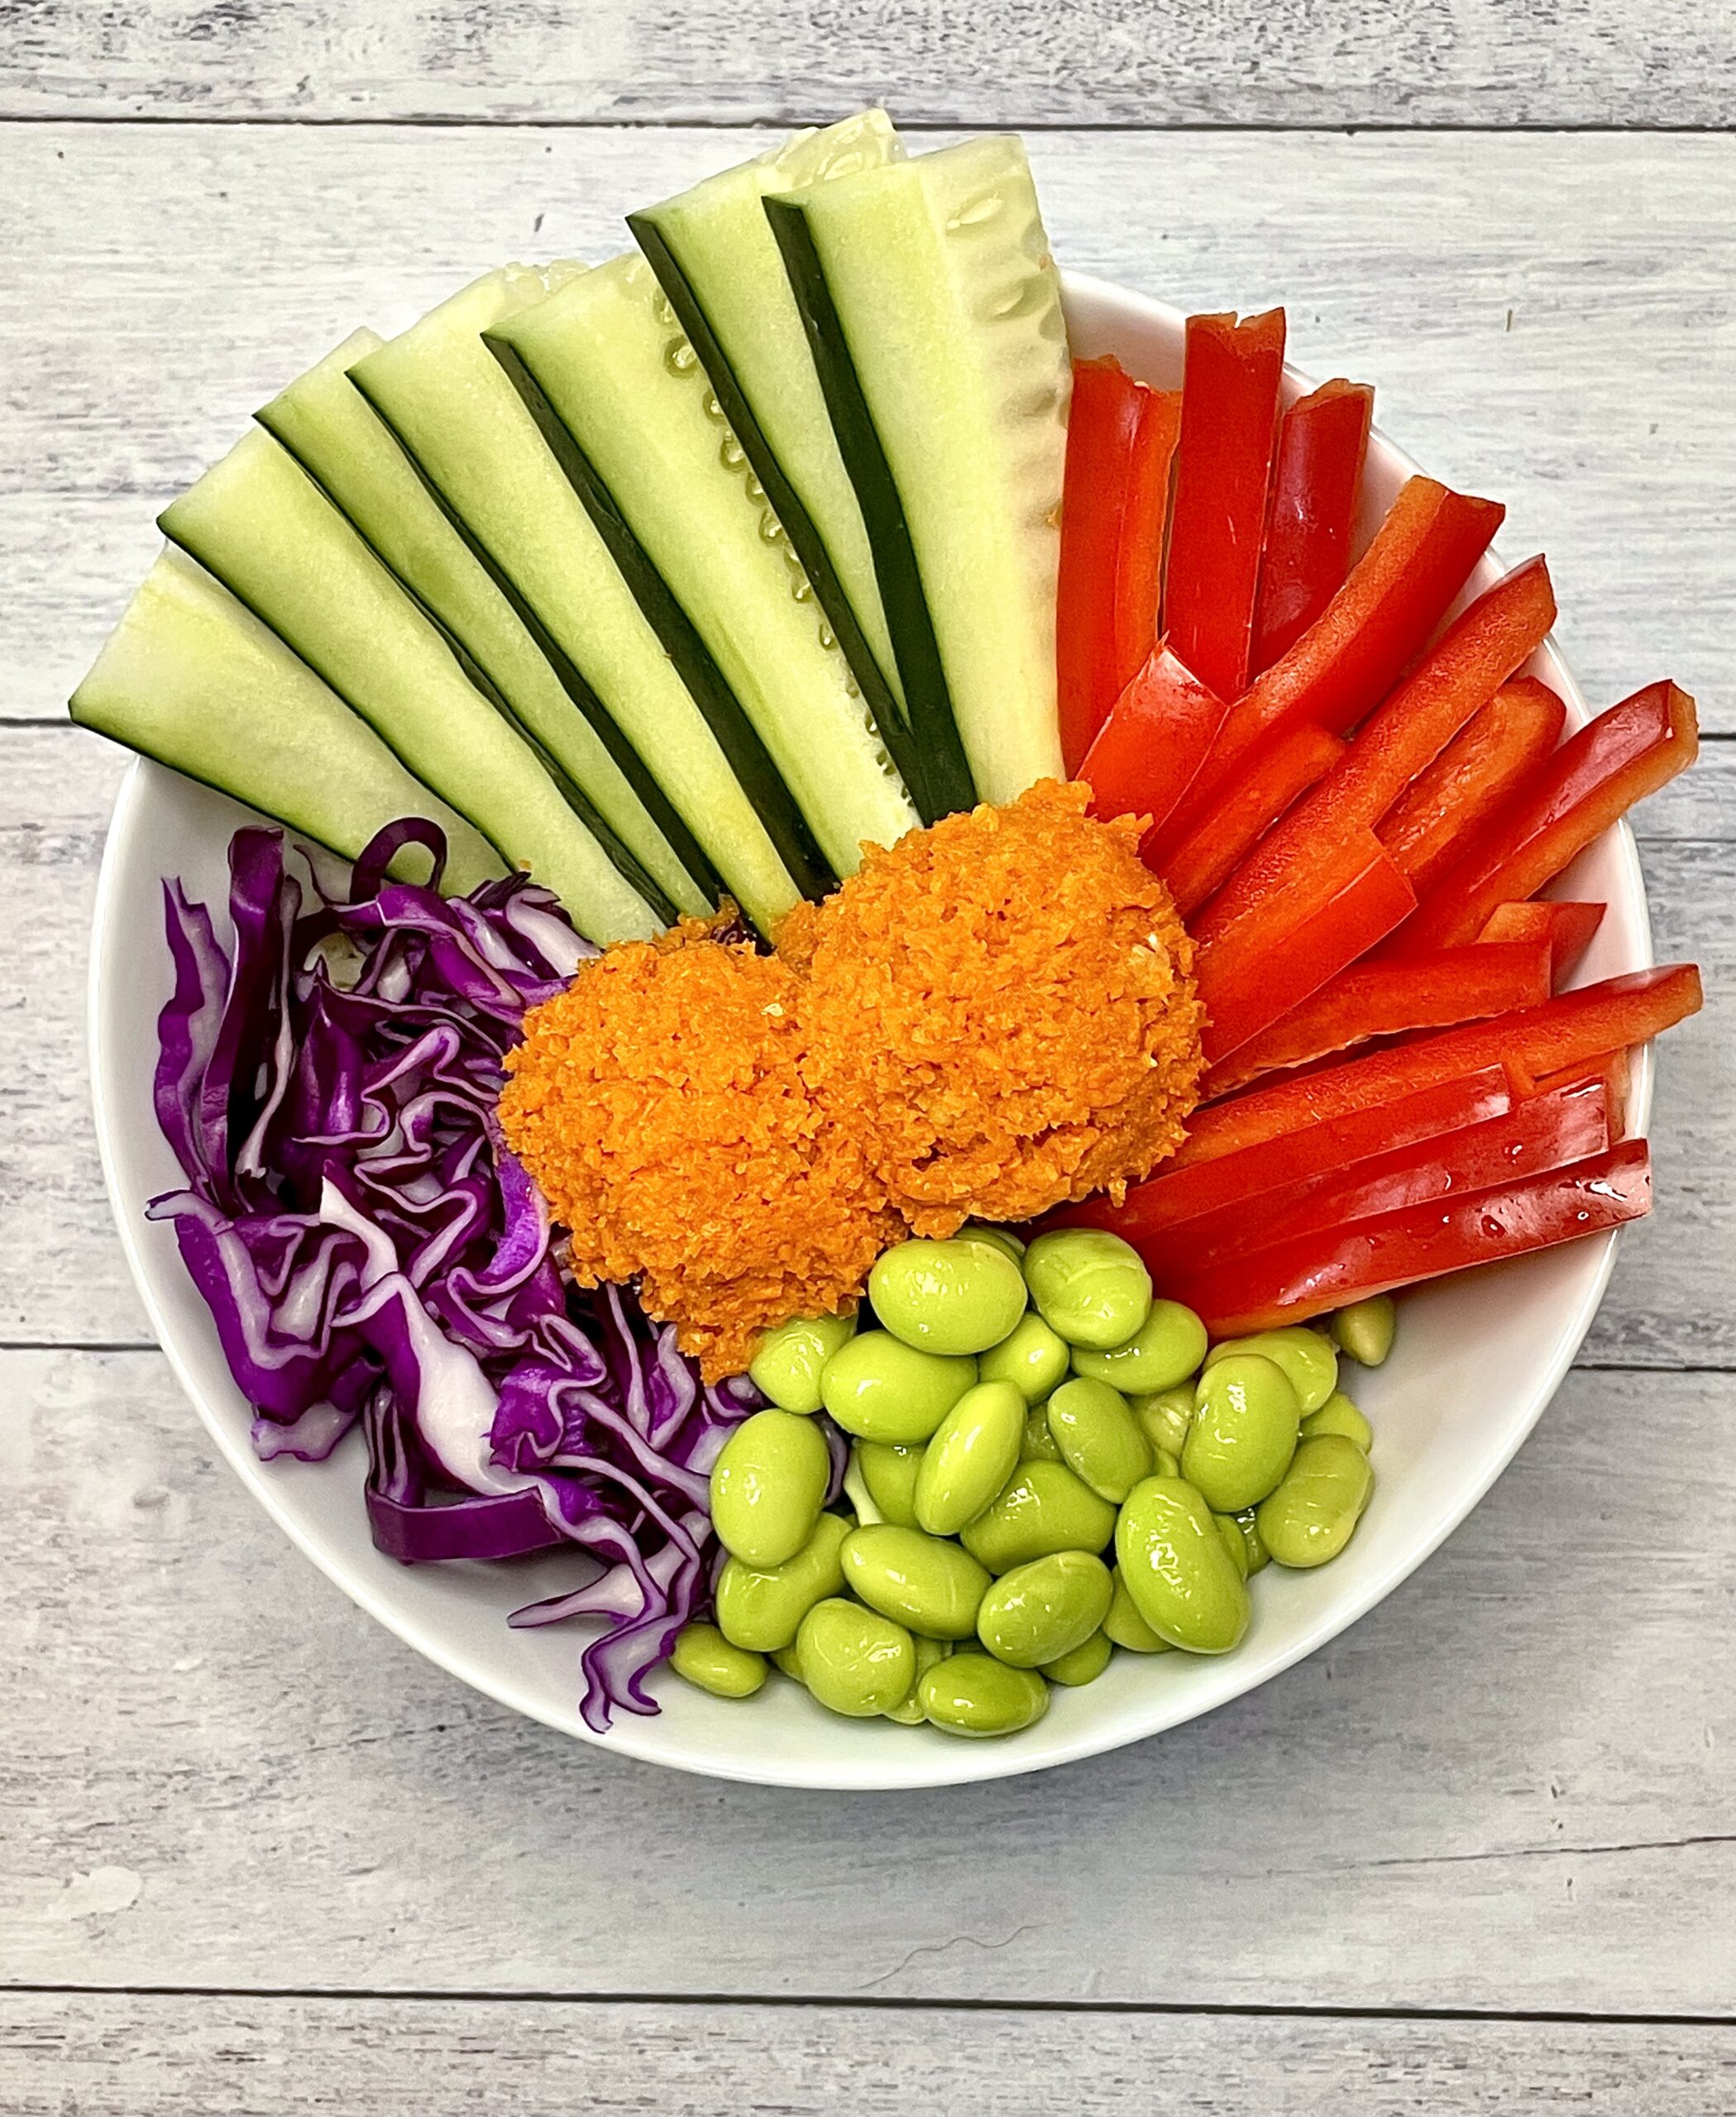 Brown Rice Cabbage and Edamame Grain Bowl with Carrot-Ginger Dressing